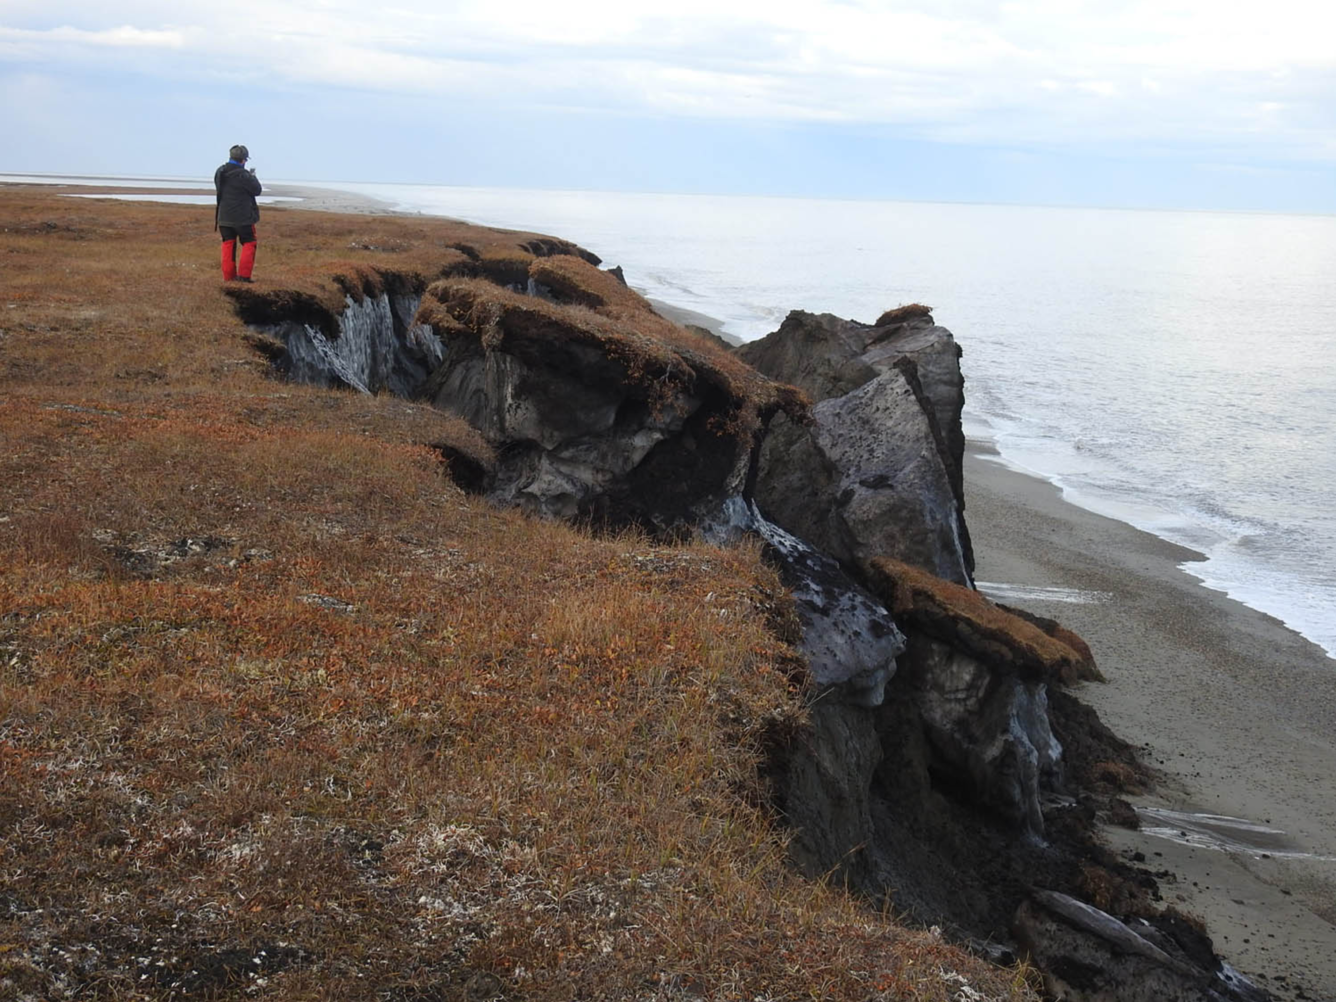 A person stands on tundra at the edge of a cliff that has gigantic chunks of eroded blocks tumbled down onto the beach.